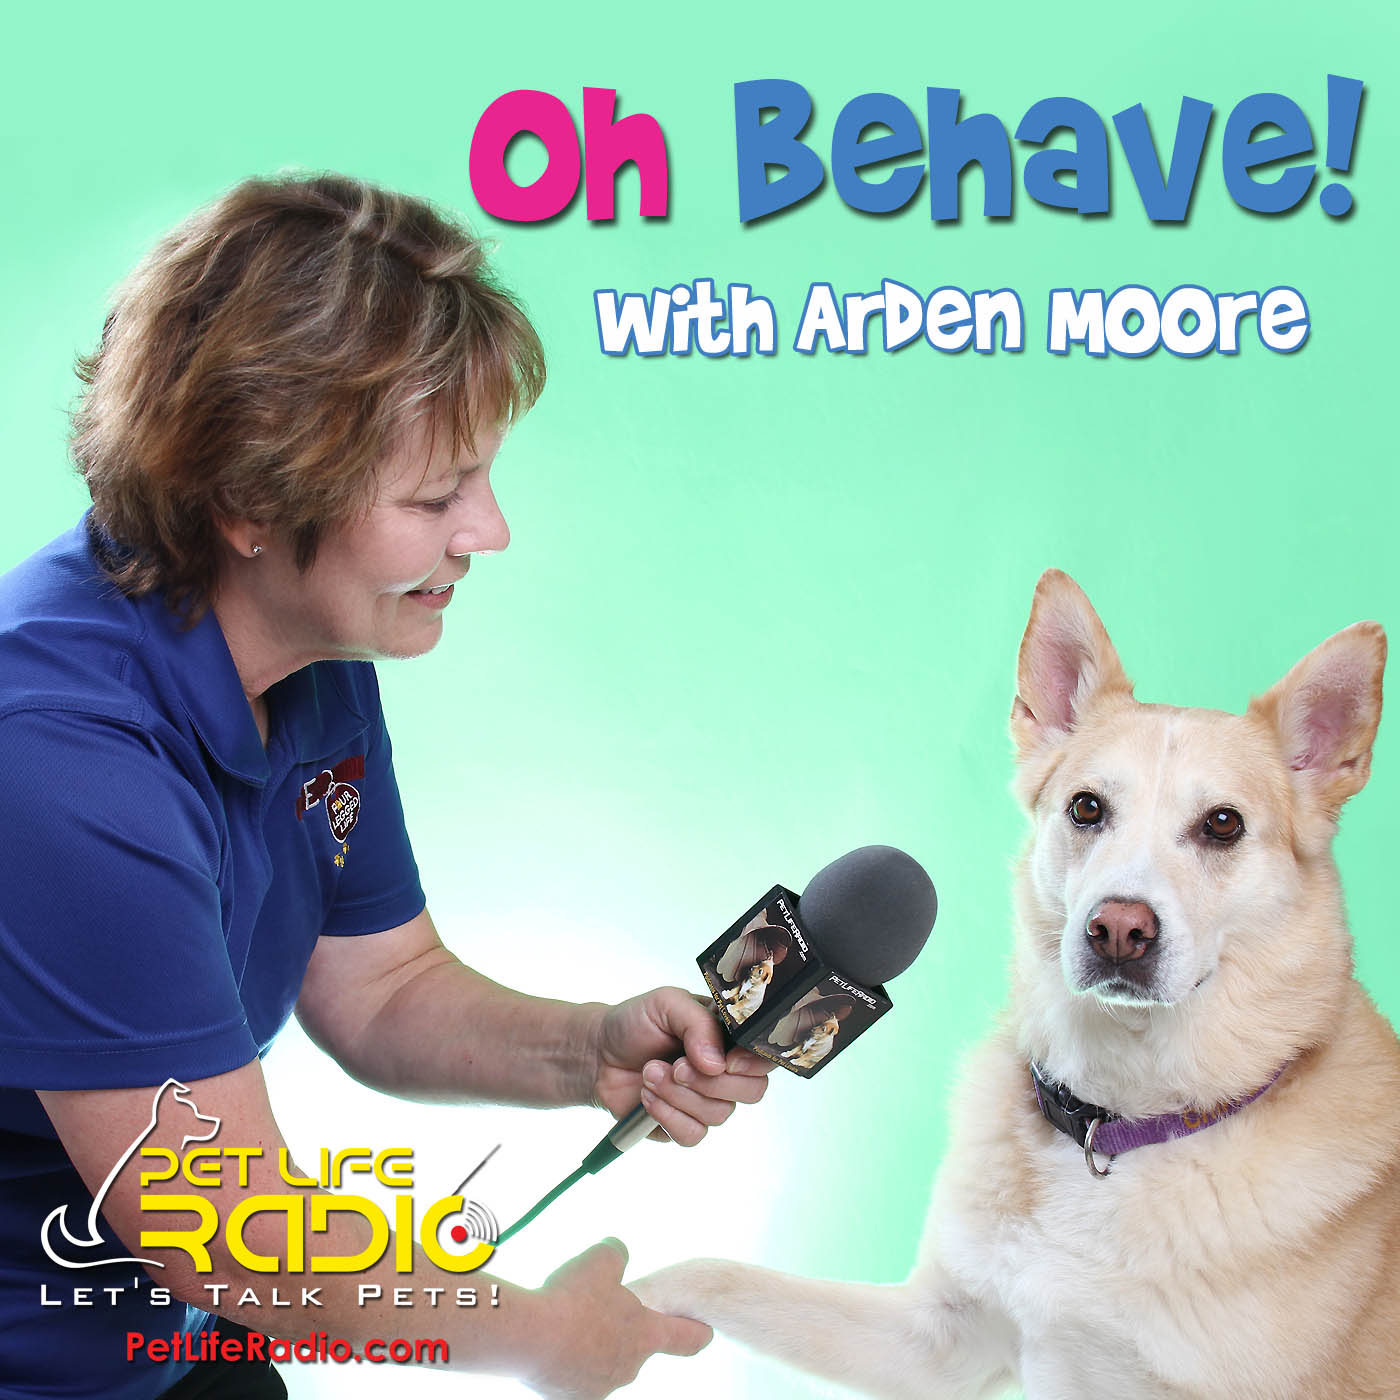 Oh Behave - Harmony in the household with your pets - Recommended by Oprah - Pet Life Radio Original (PetLifeRadio.com) Podcast artwork